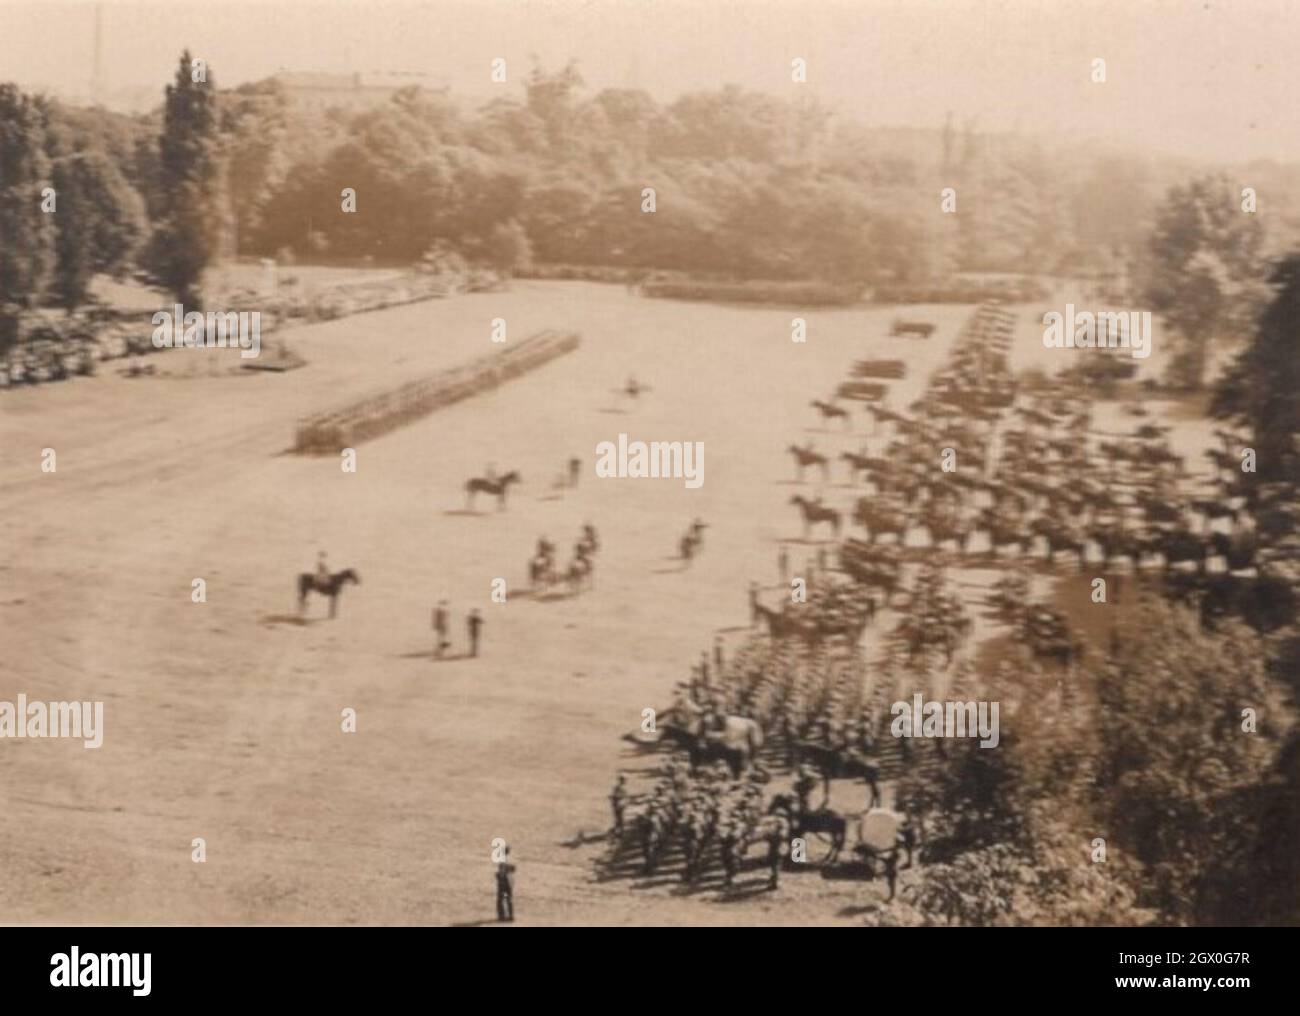 super rare vintage photo from the late 19th century. This is a military cavalry parade or military practice ( army exercise, maneuver, manoeuvre) . Source: Original photograph Stock Photo